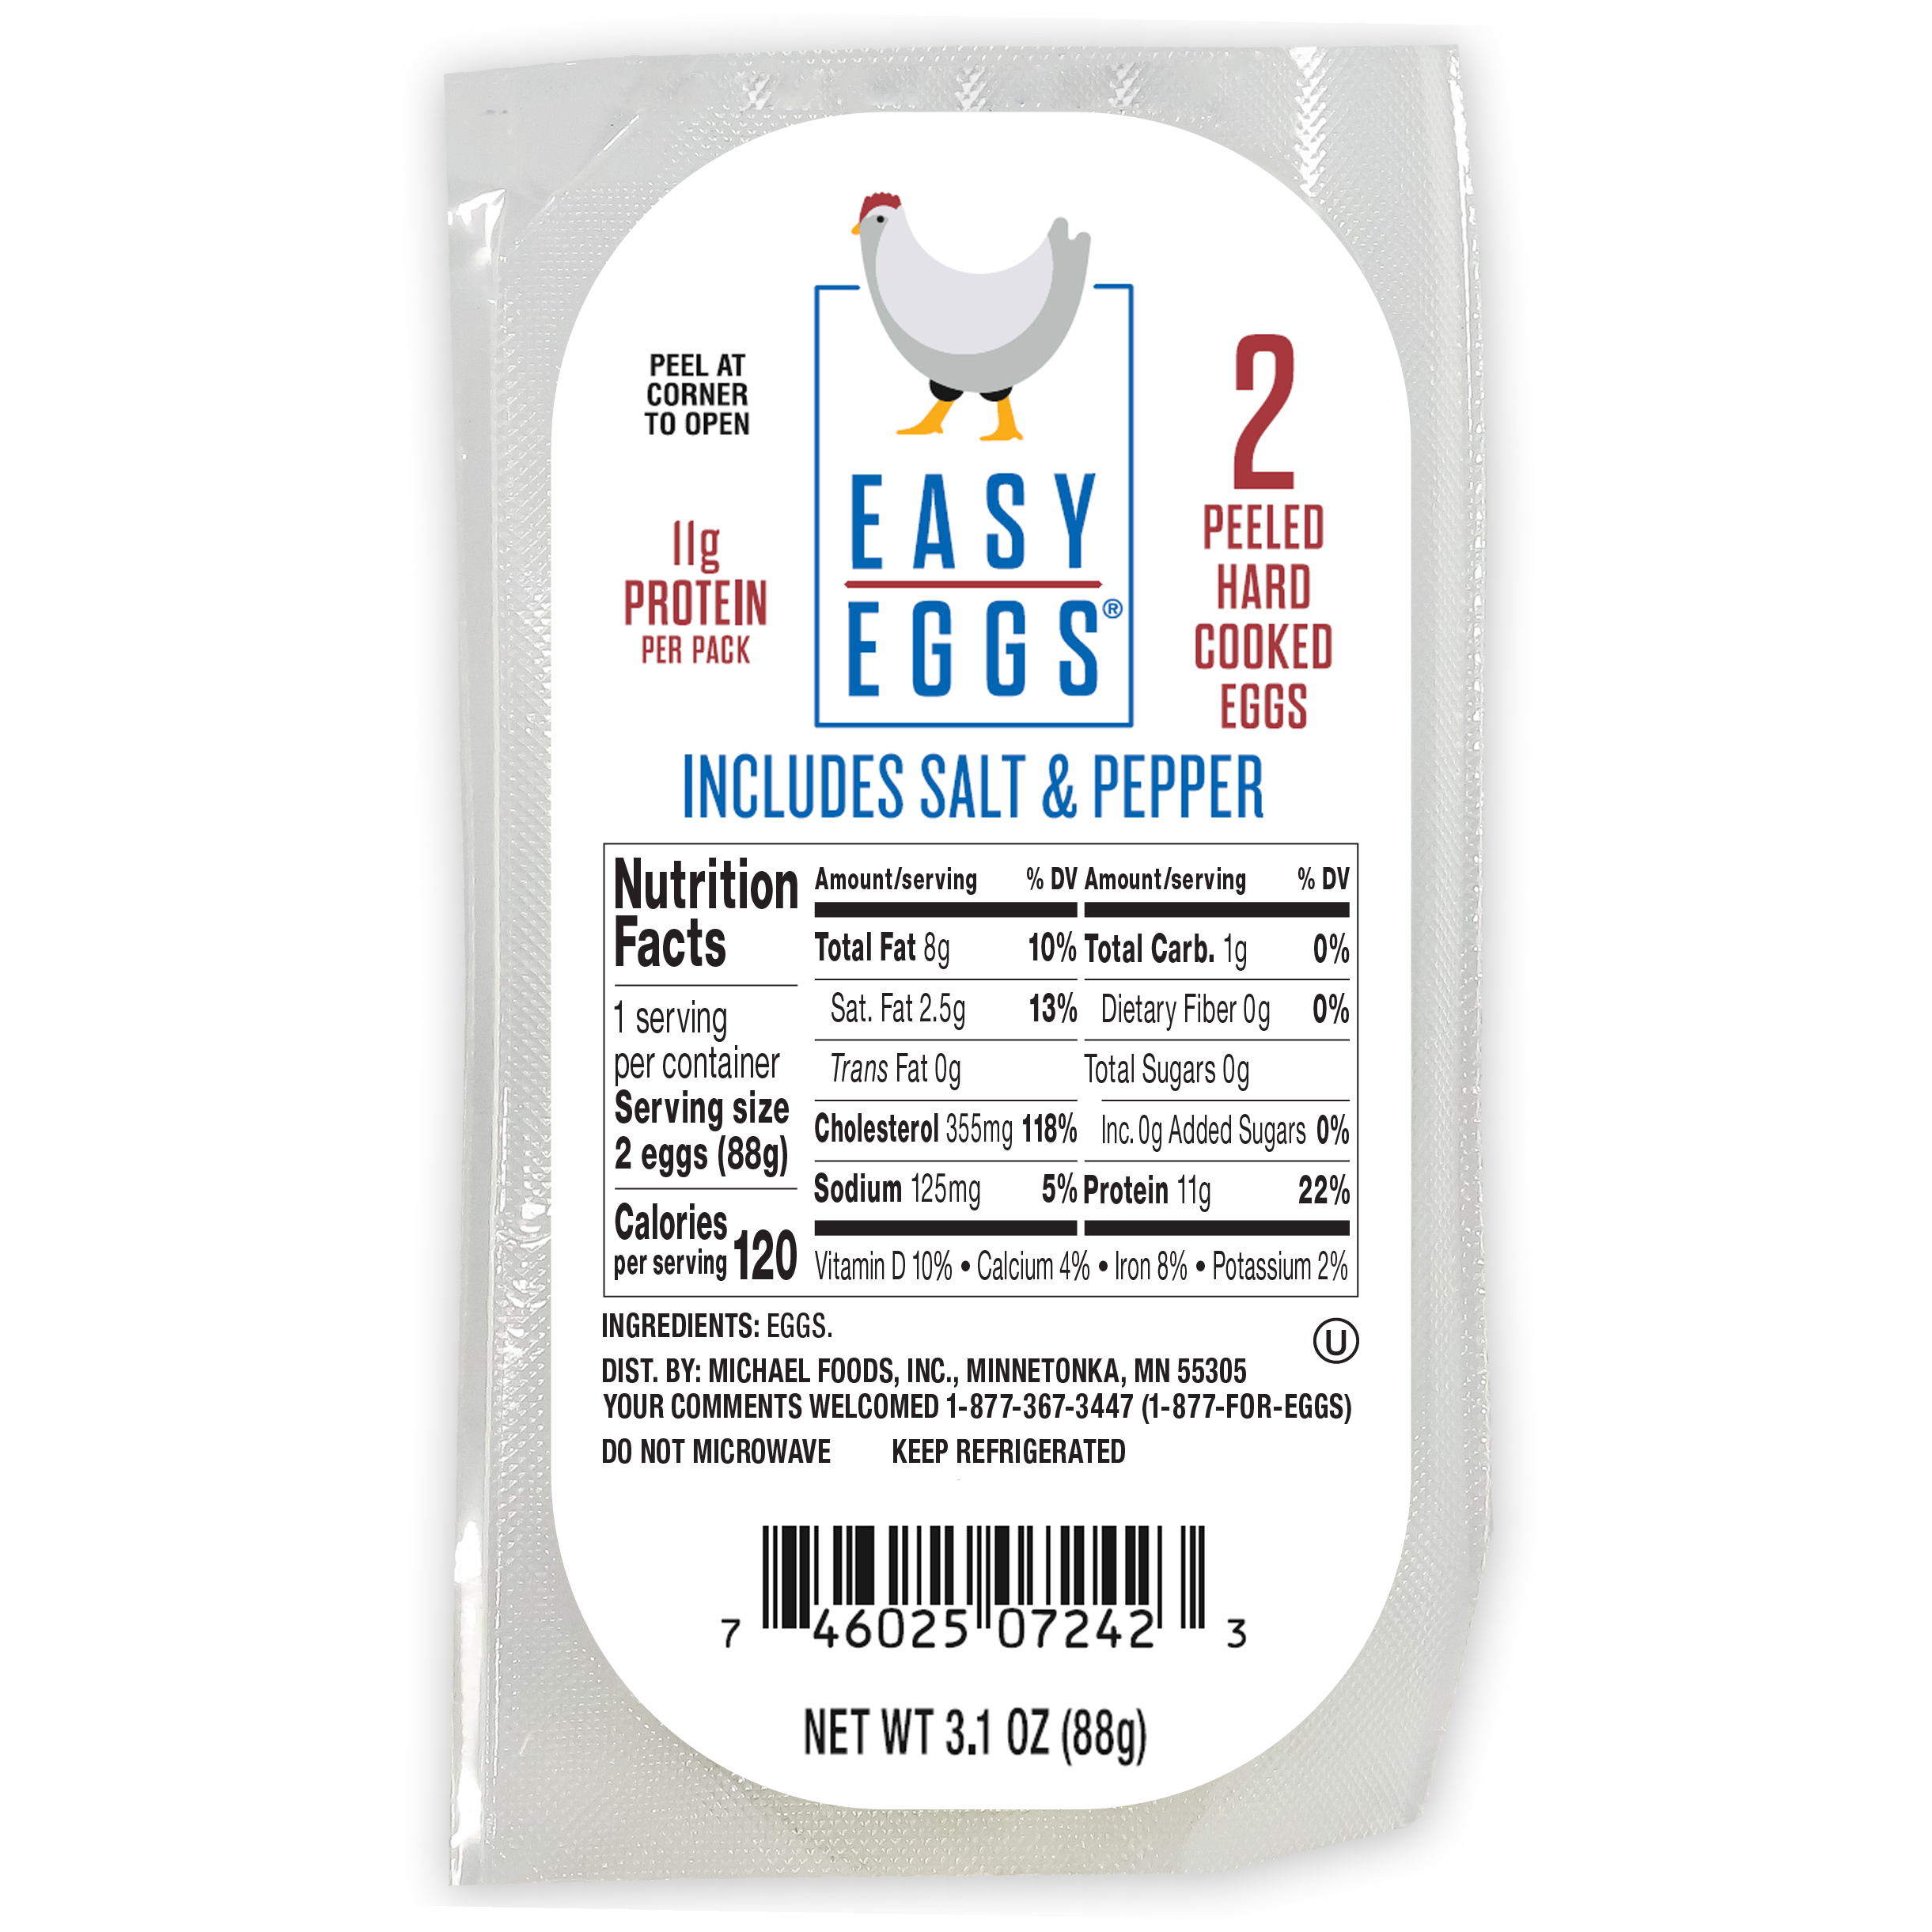 Easy Eggs® Peeled Hard Cooked Eggs with Salt & Pepper, 2 Retail Trays with 10-2 Count Grab 'N Go Dry Packs